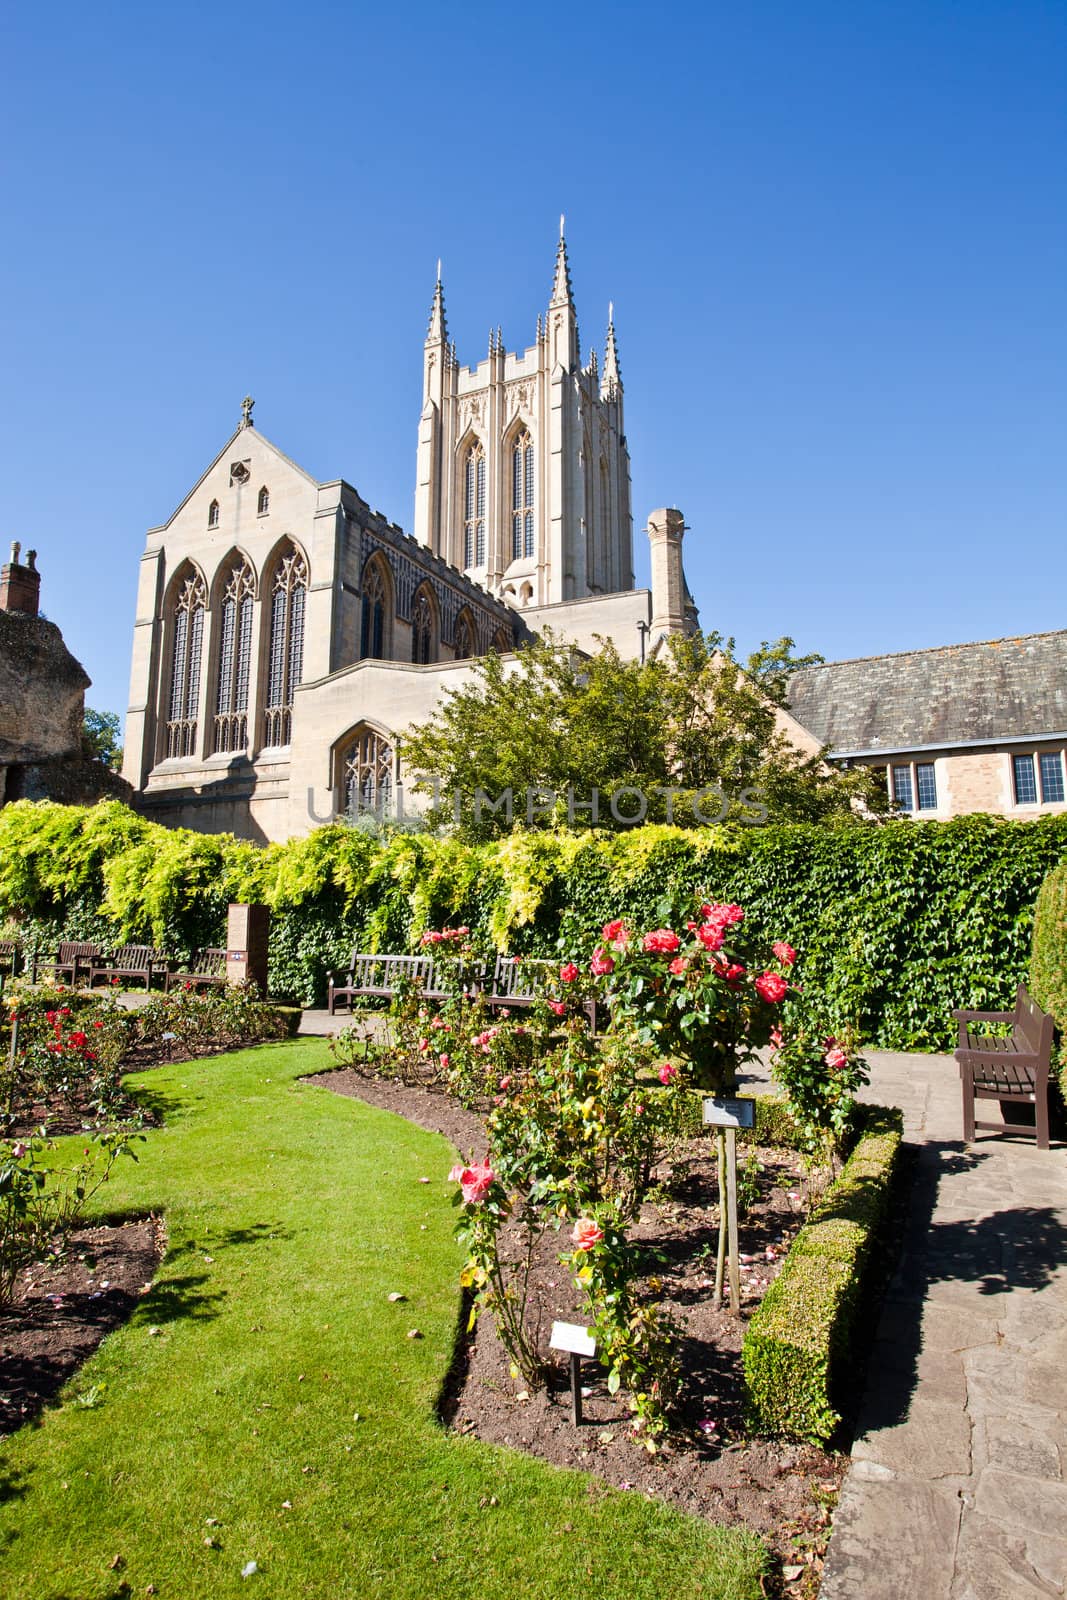 St Edmundsbury Cathedral in England, with a rose garden in the foreground